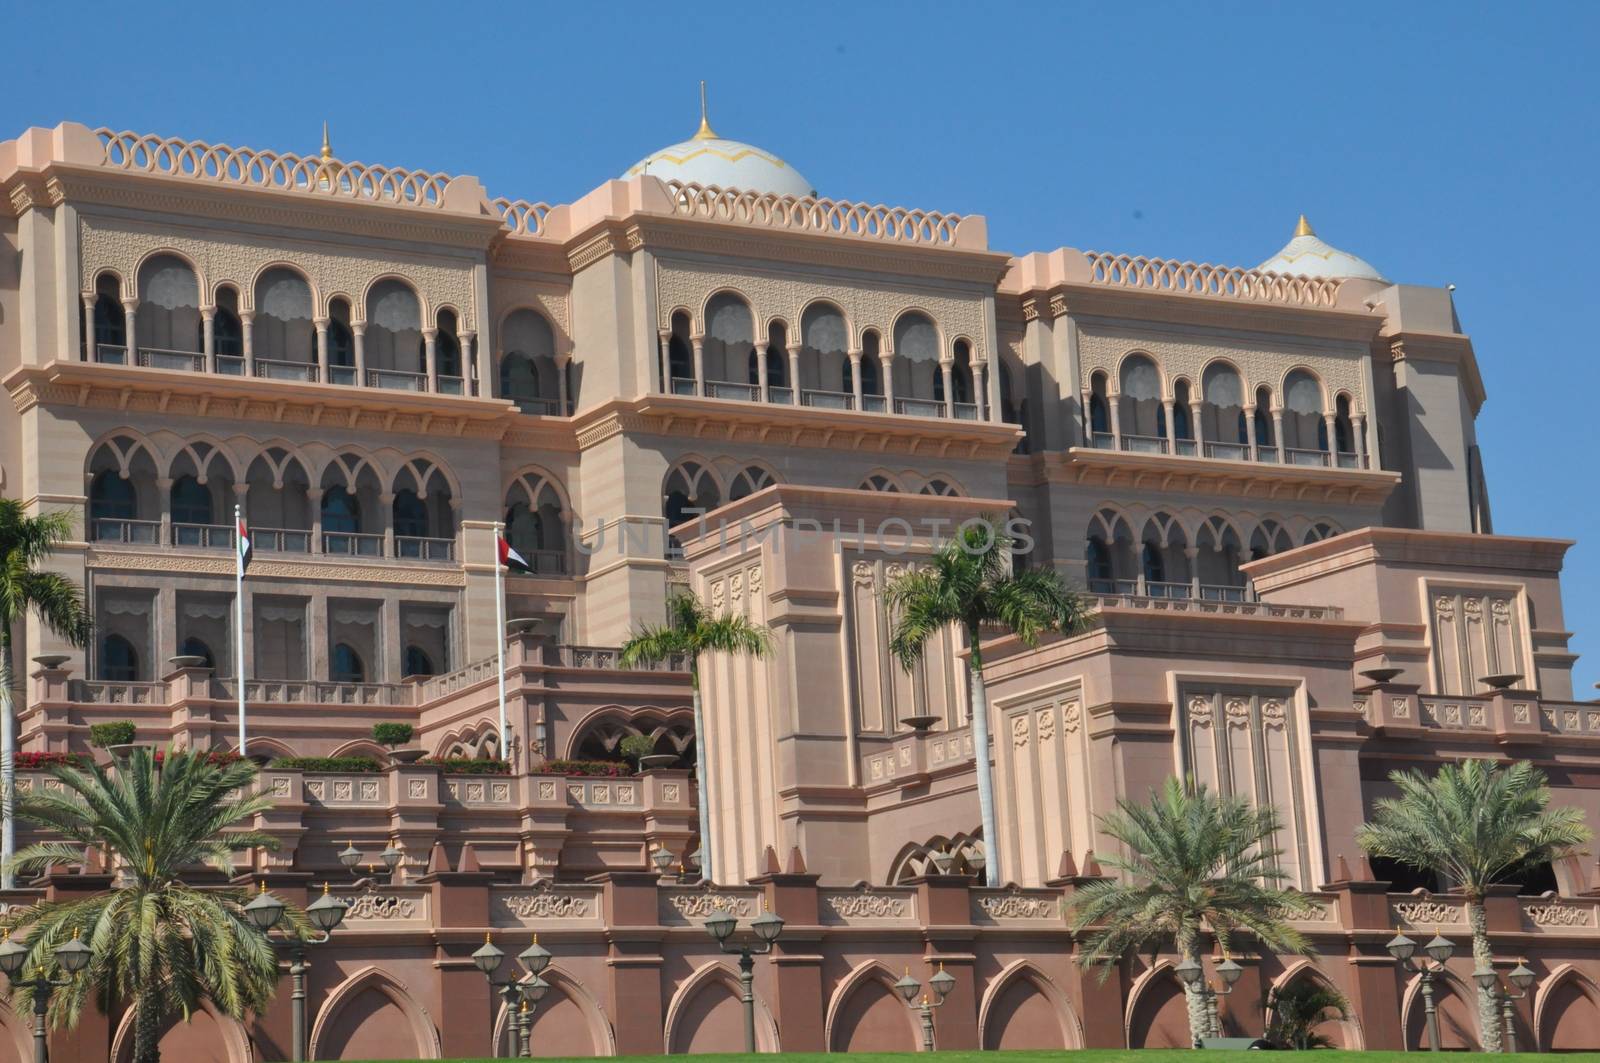 Emirates Palace Hotel in Abu Dhabi, UAE. It is a seven star luxury hotel and has its own marina and helipad.